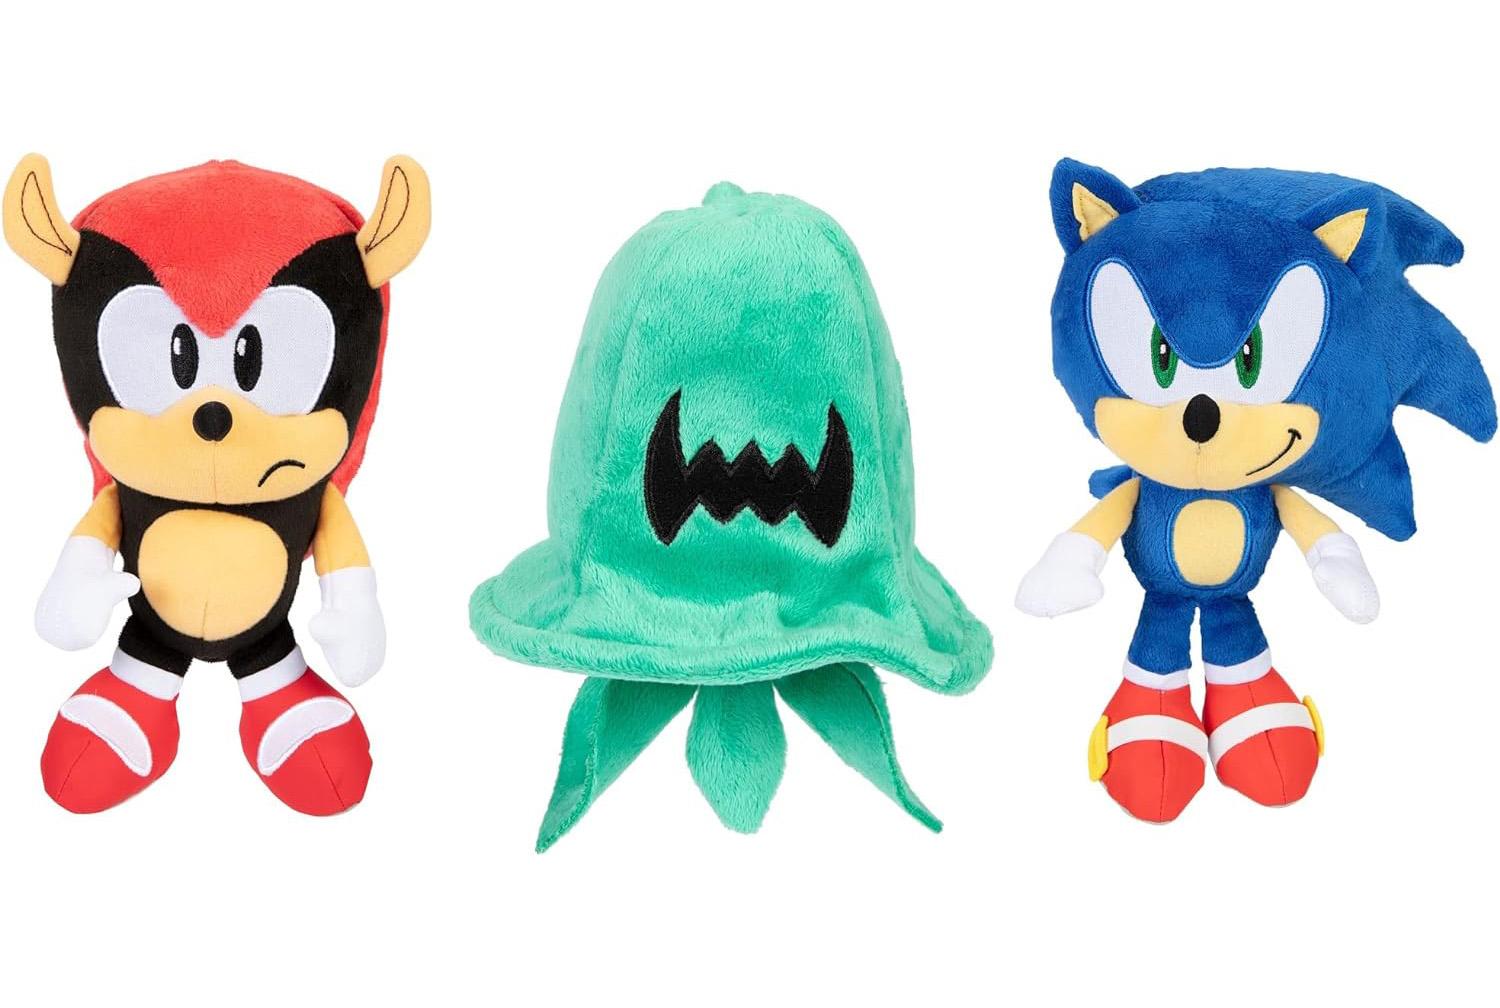 Sonic The Hedgehog 9in Plush Classic Collectible Sonic 3 Pack for $9.99